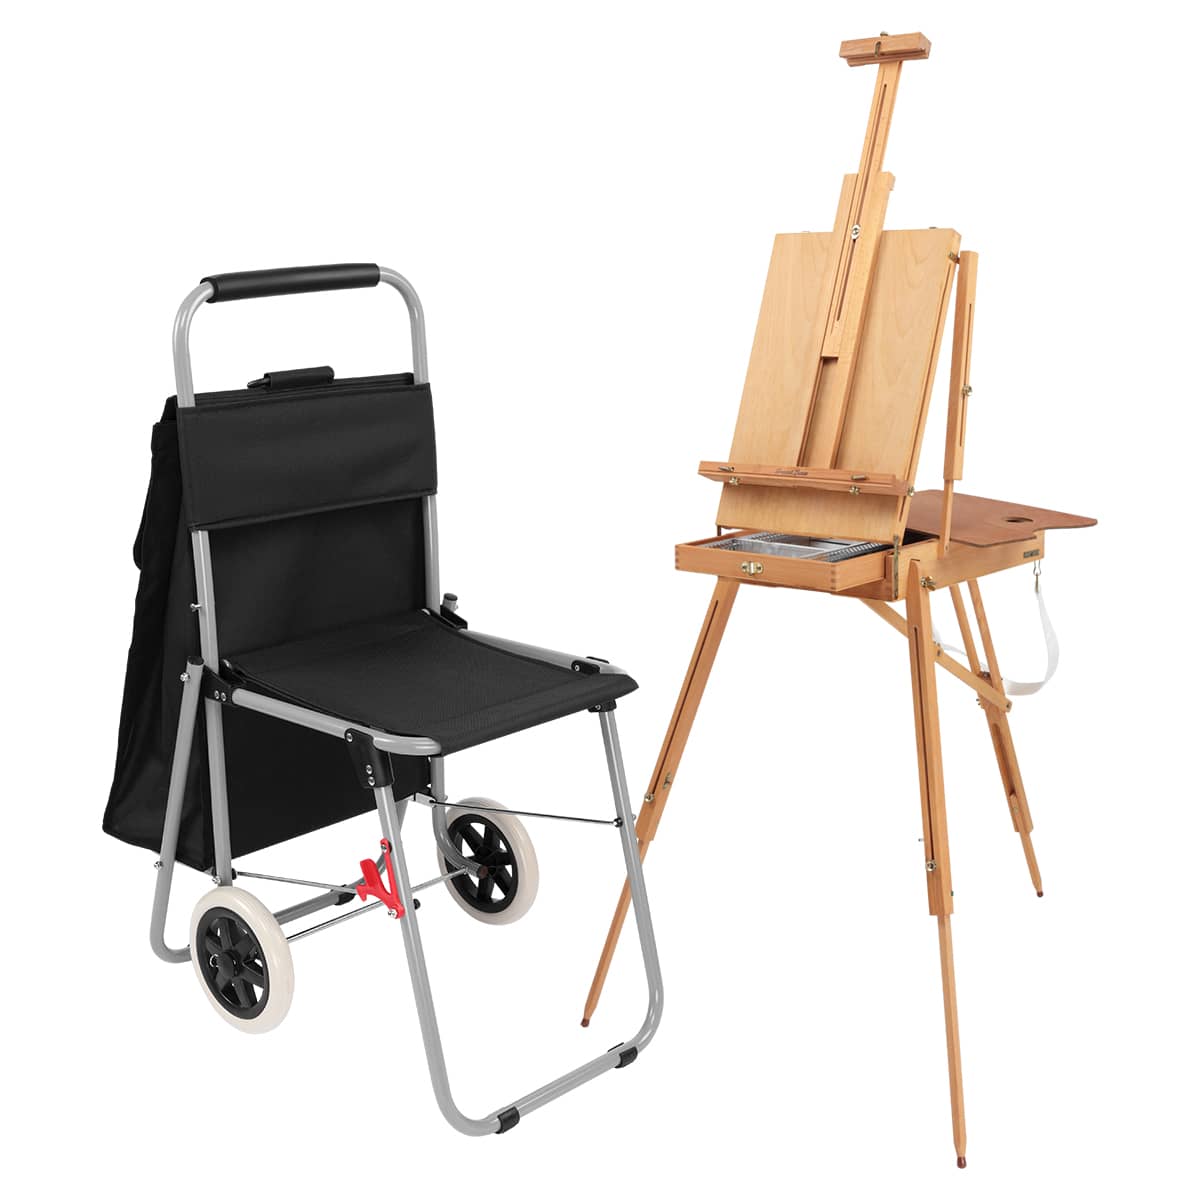 Artcomber Portable Chair Black & Grand Luxe Full French Easel Deluxe Combo Set